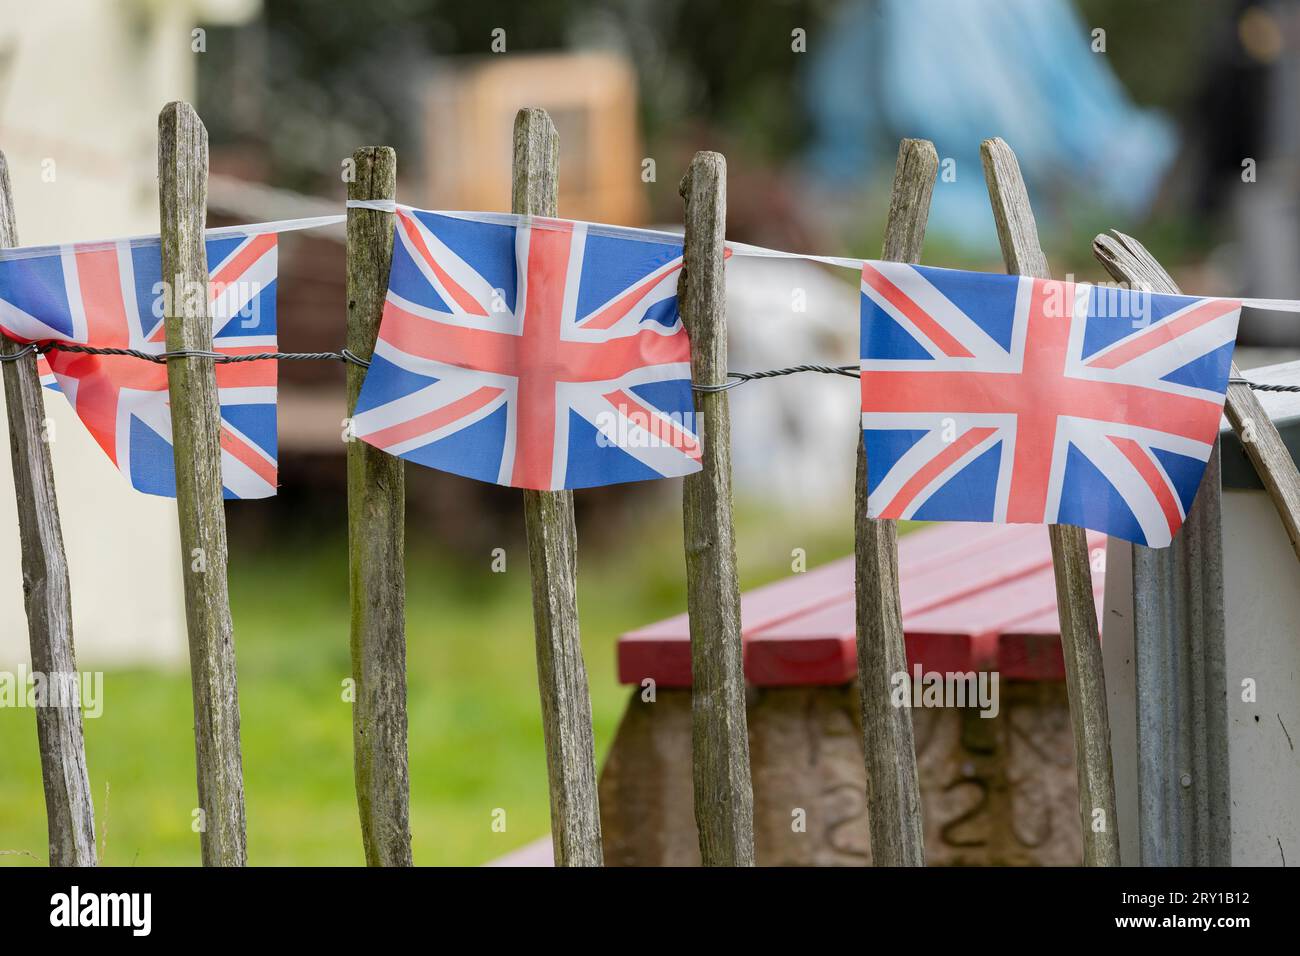 Union Jack bunting on a fence row, many flags in row on a string, front of garden VE day decorations in UK, Stock Photo